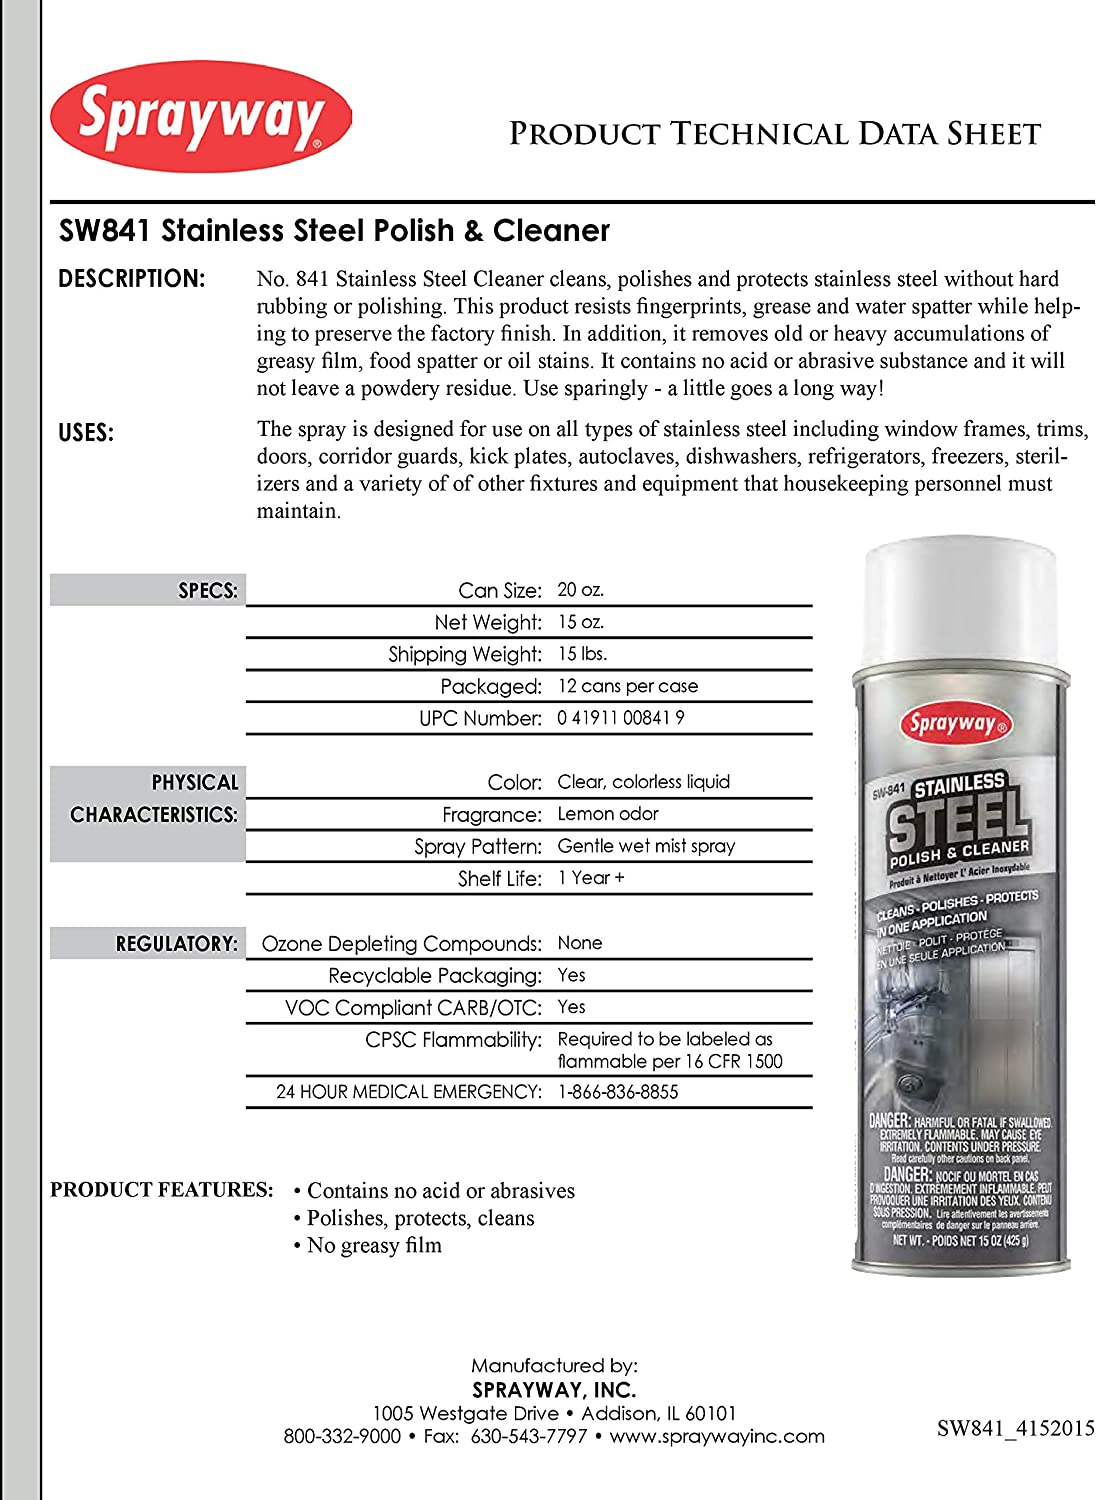 Sprayway SW841 Stainless Steel Cleaner and Polish, Protects and Preserves, Resists Streaks and Finger Prints, 15 Oz